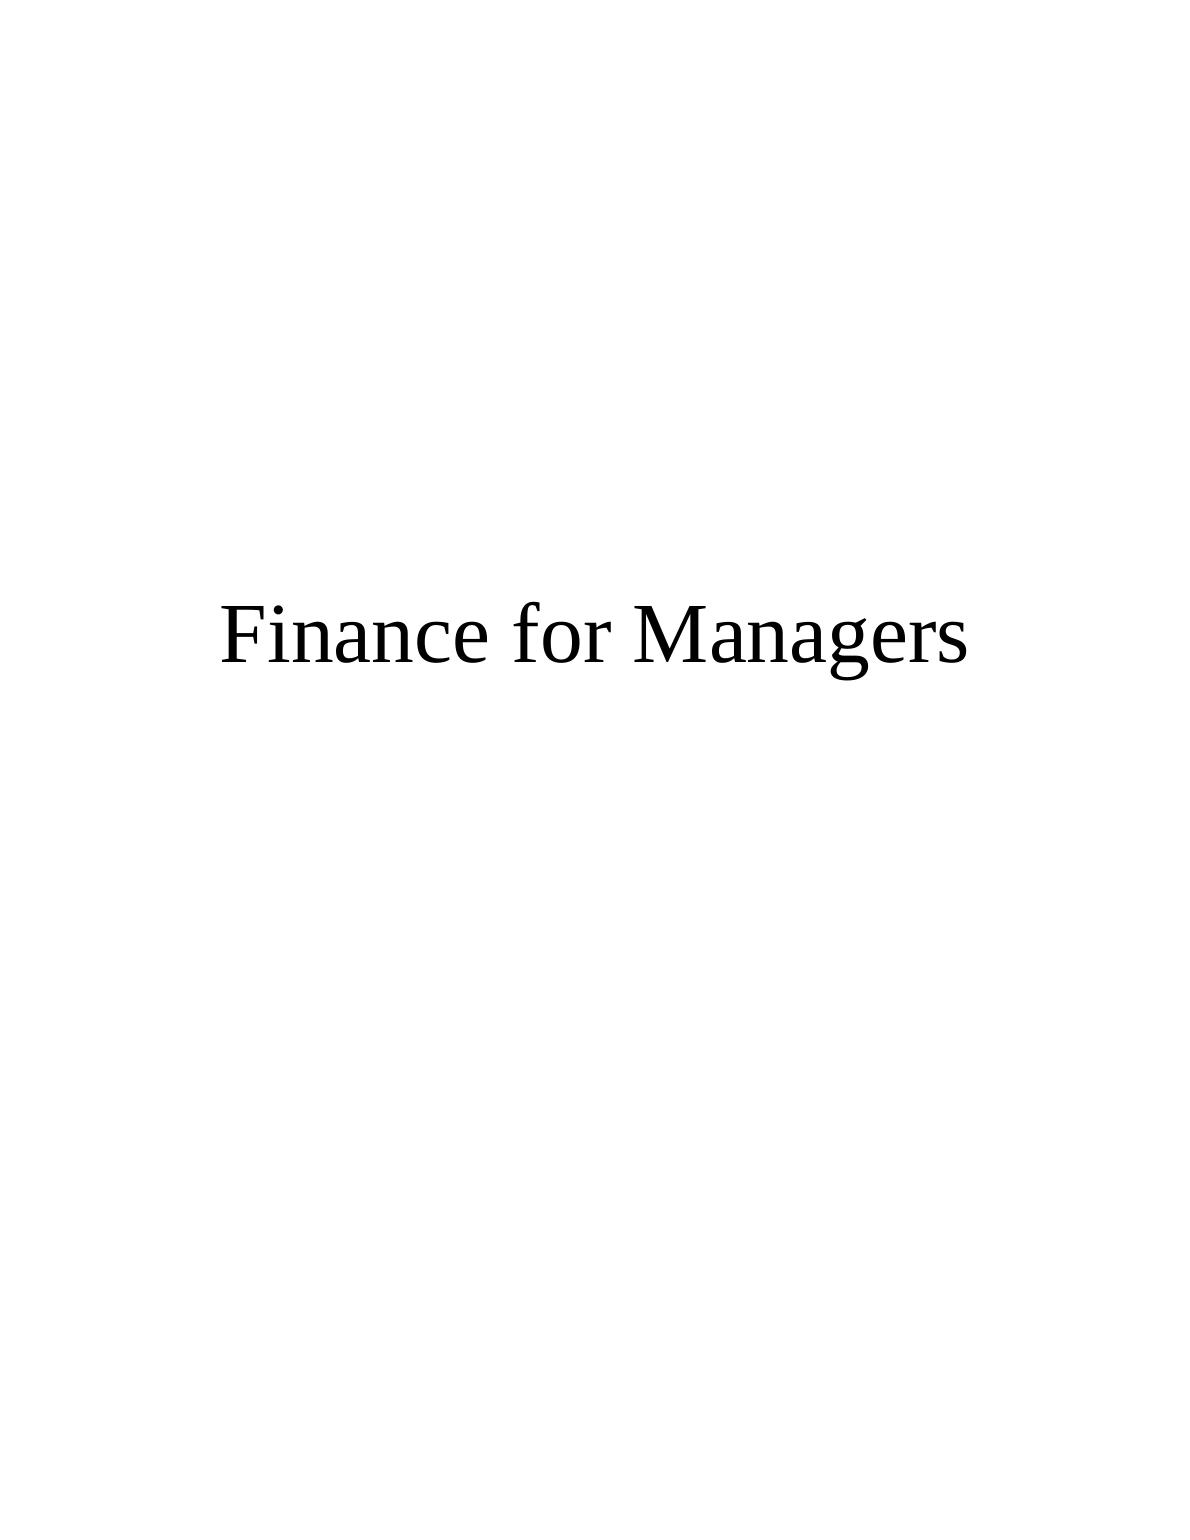 Finance for Managers Assignment Solved_1